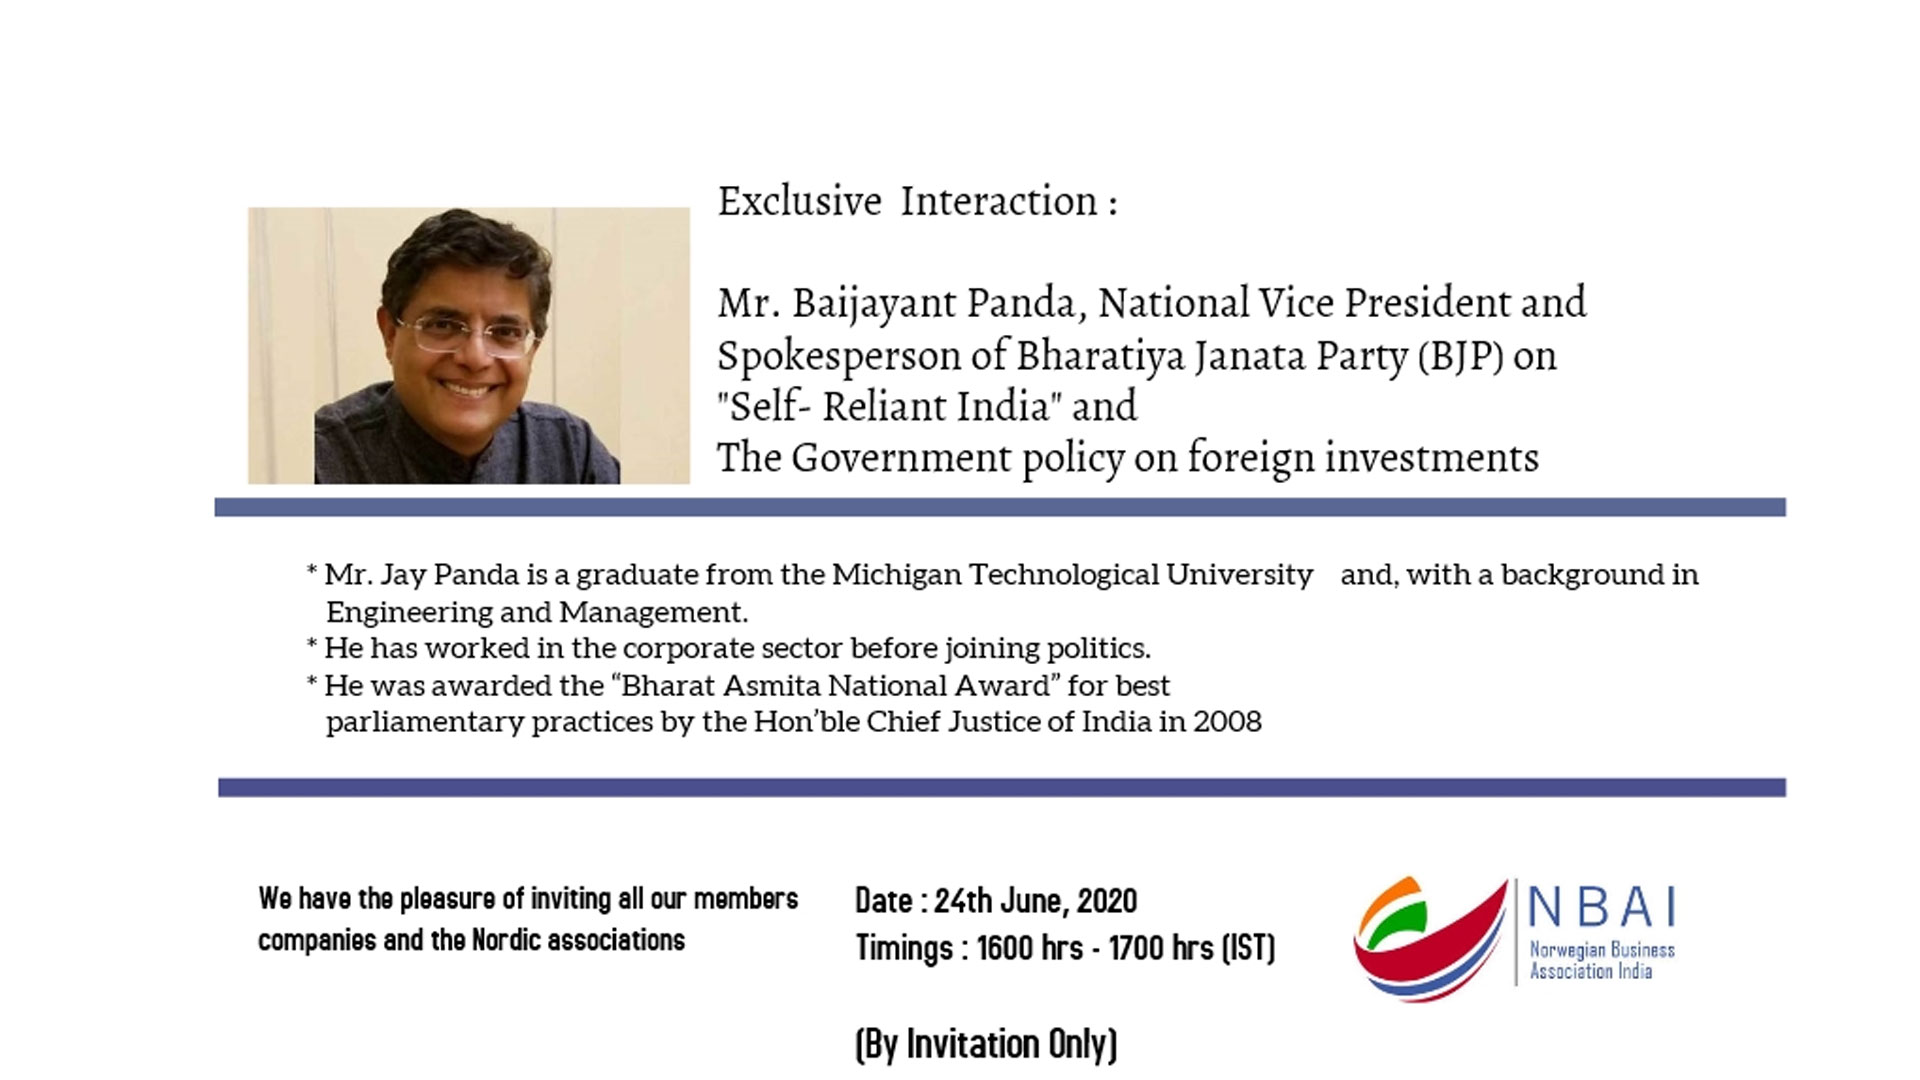 EXCLUSIVE INTERACTION WITH MR. BAIJAYANT PANDA, NATIONAL VICE PRESIDENT AND  SPOKESPERSON OF BHARATIYA JANATA PARTY – Norwegian Business Association Of  India